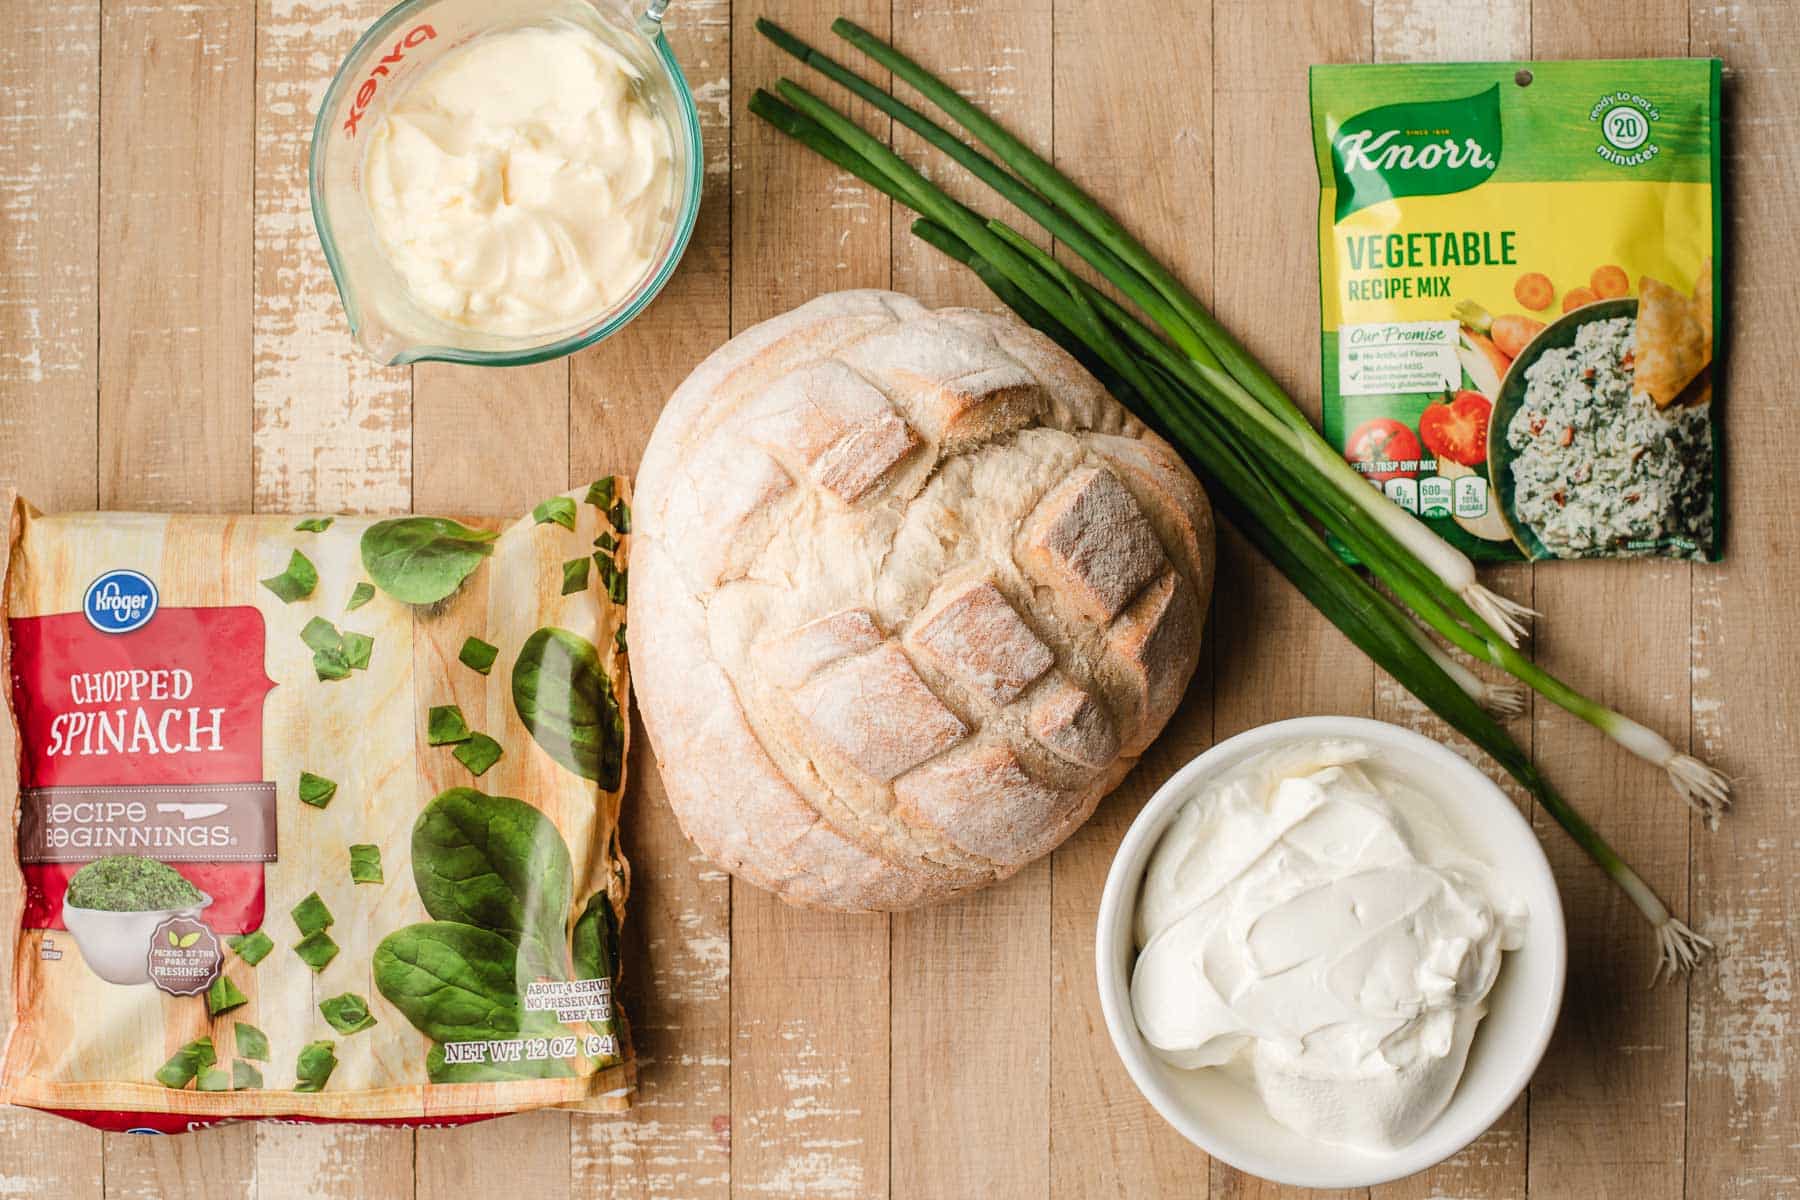 Sourdough bread bowl, frozen spinach, green onions, Knorr vegetable mix, mayonnaise, and sour cream on a wooden background.